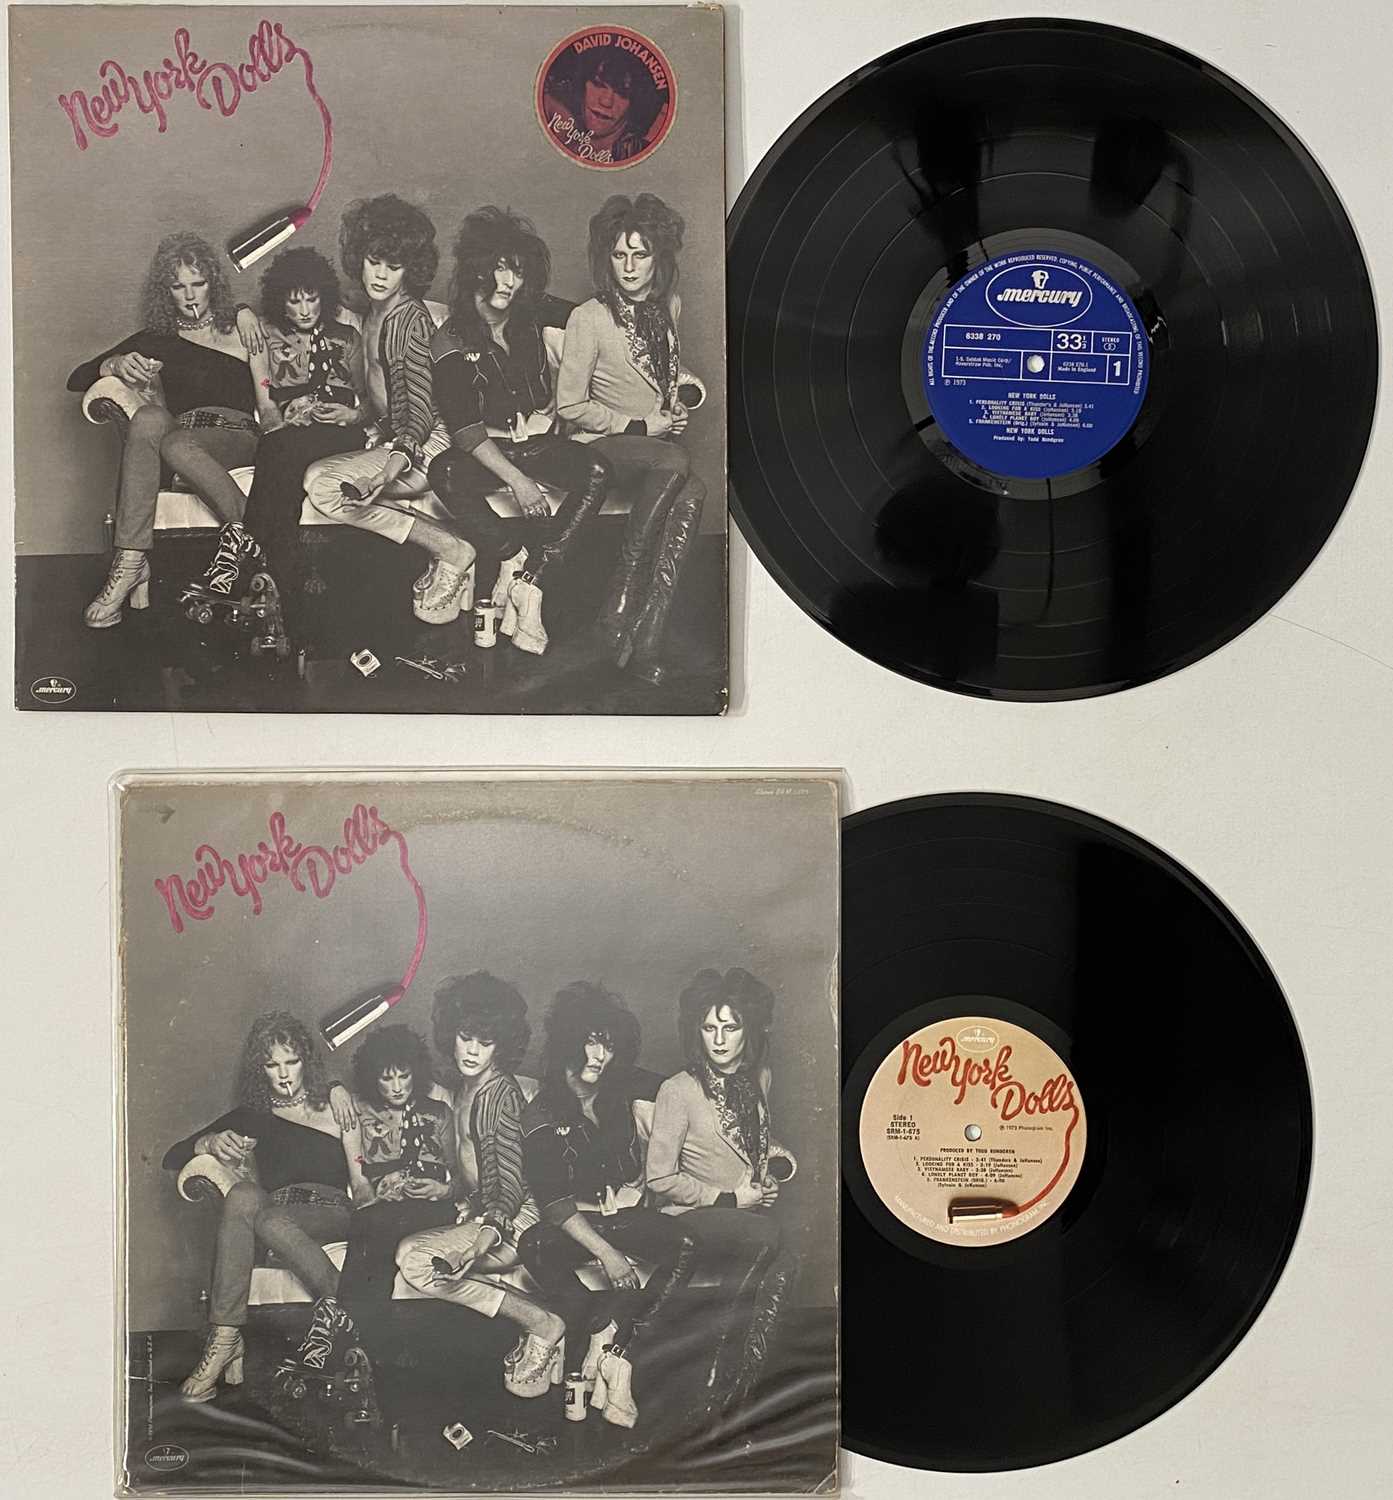 NEW YORK DOLLS - LP COLLECTION - Image 2 of 2